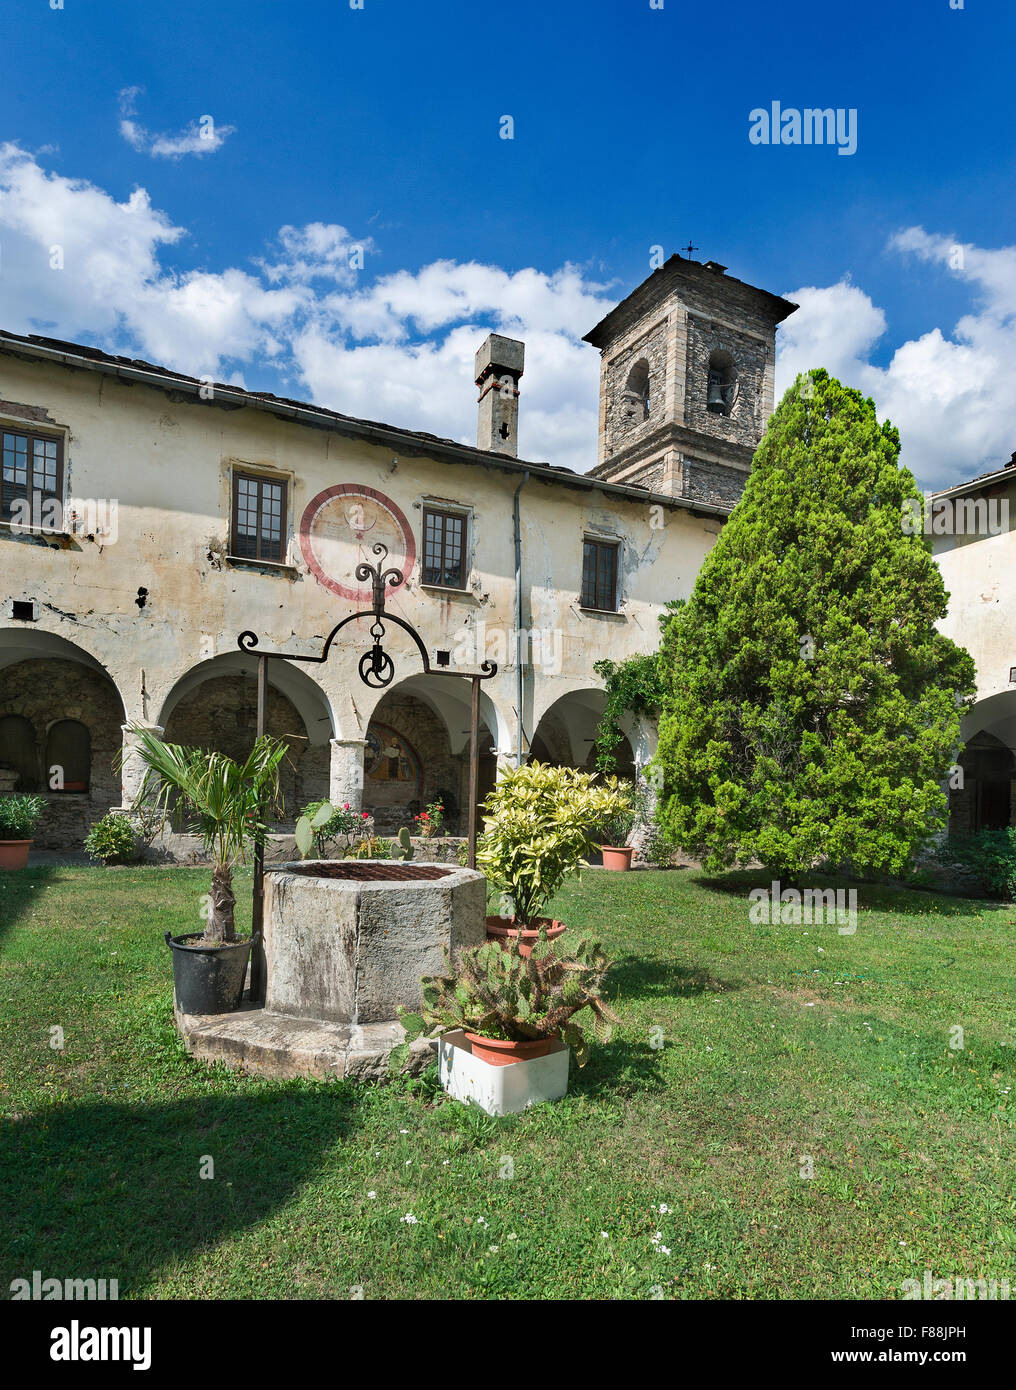 Italy, Piedmont, Turin district, Novalesa, the cloister of the medieval Abbey Stock Photo